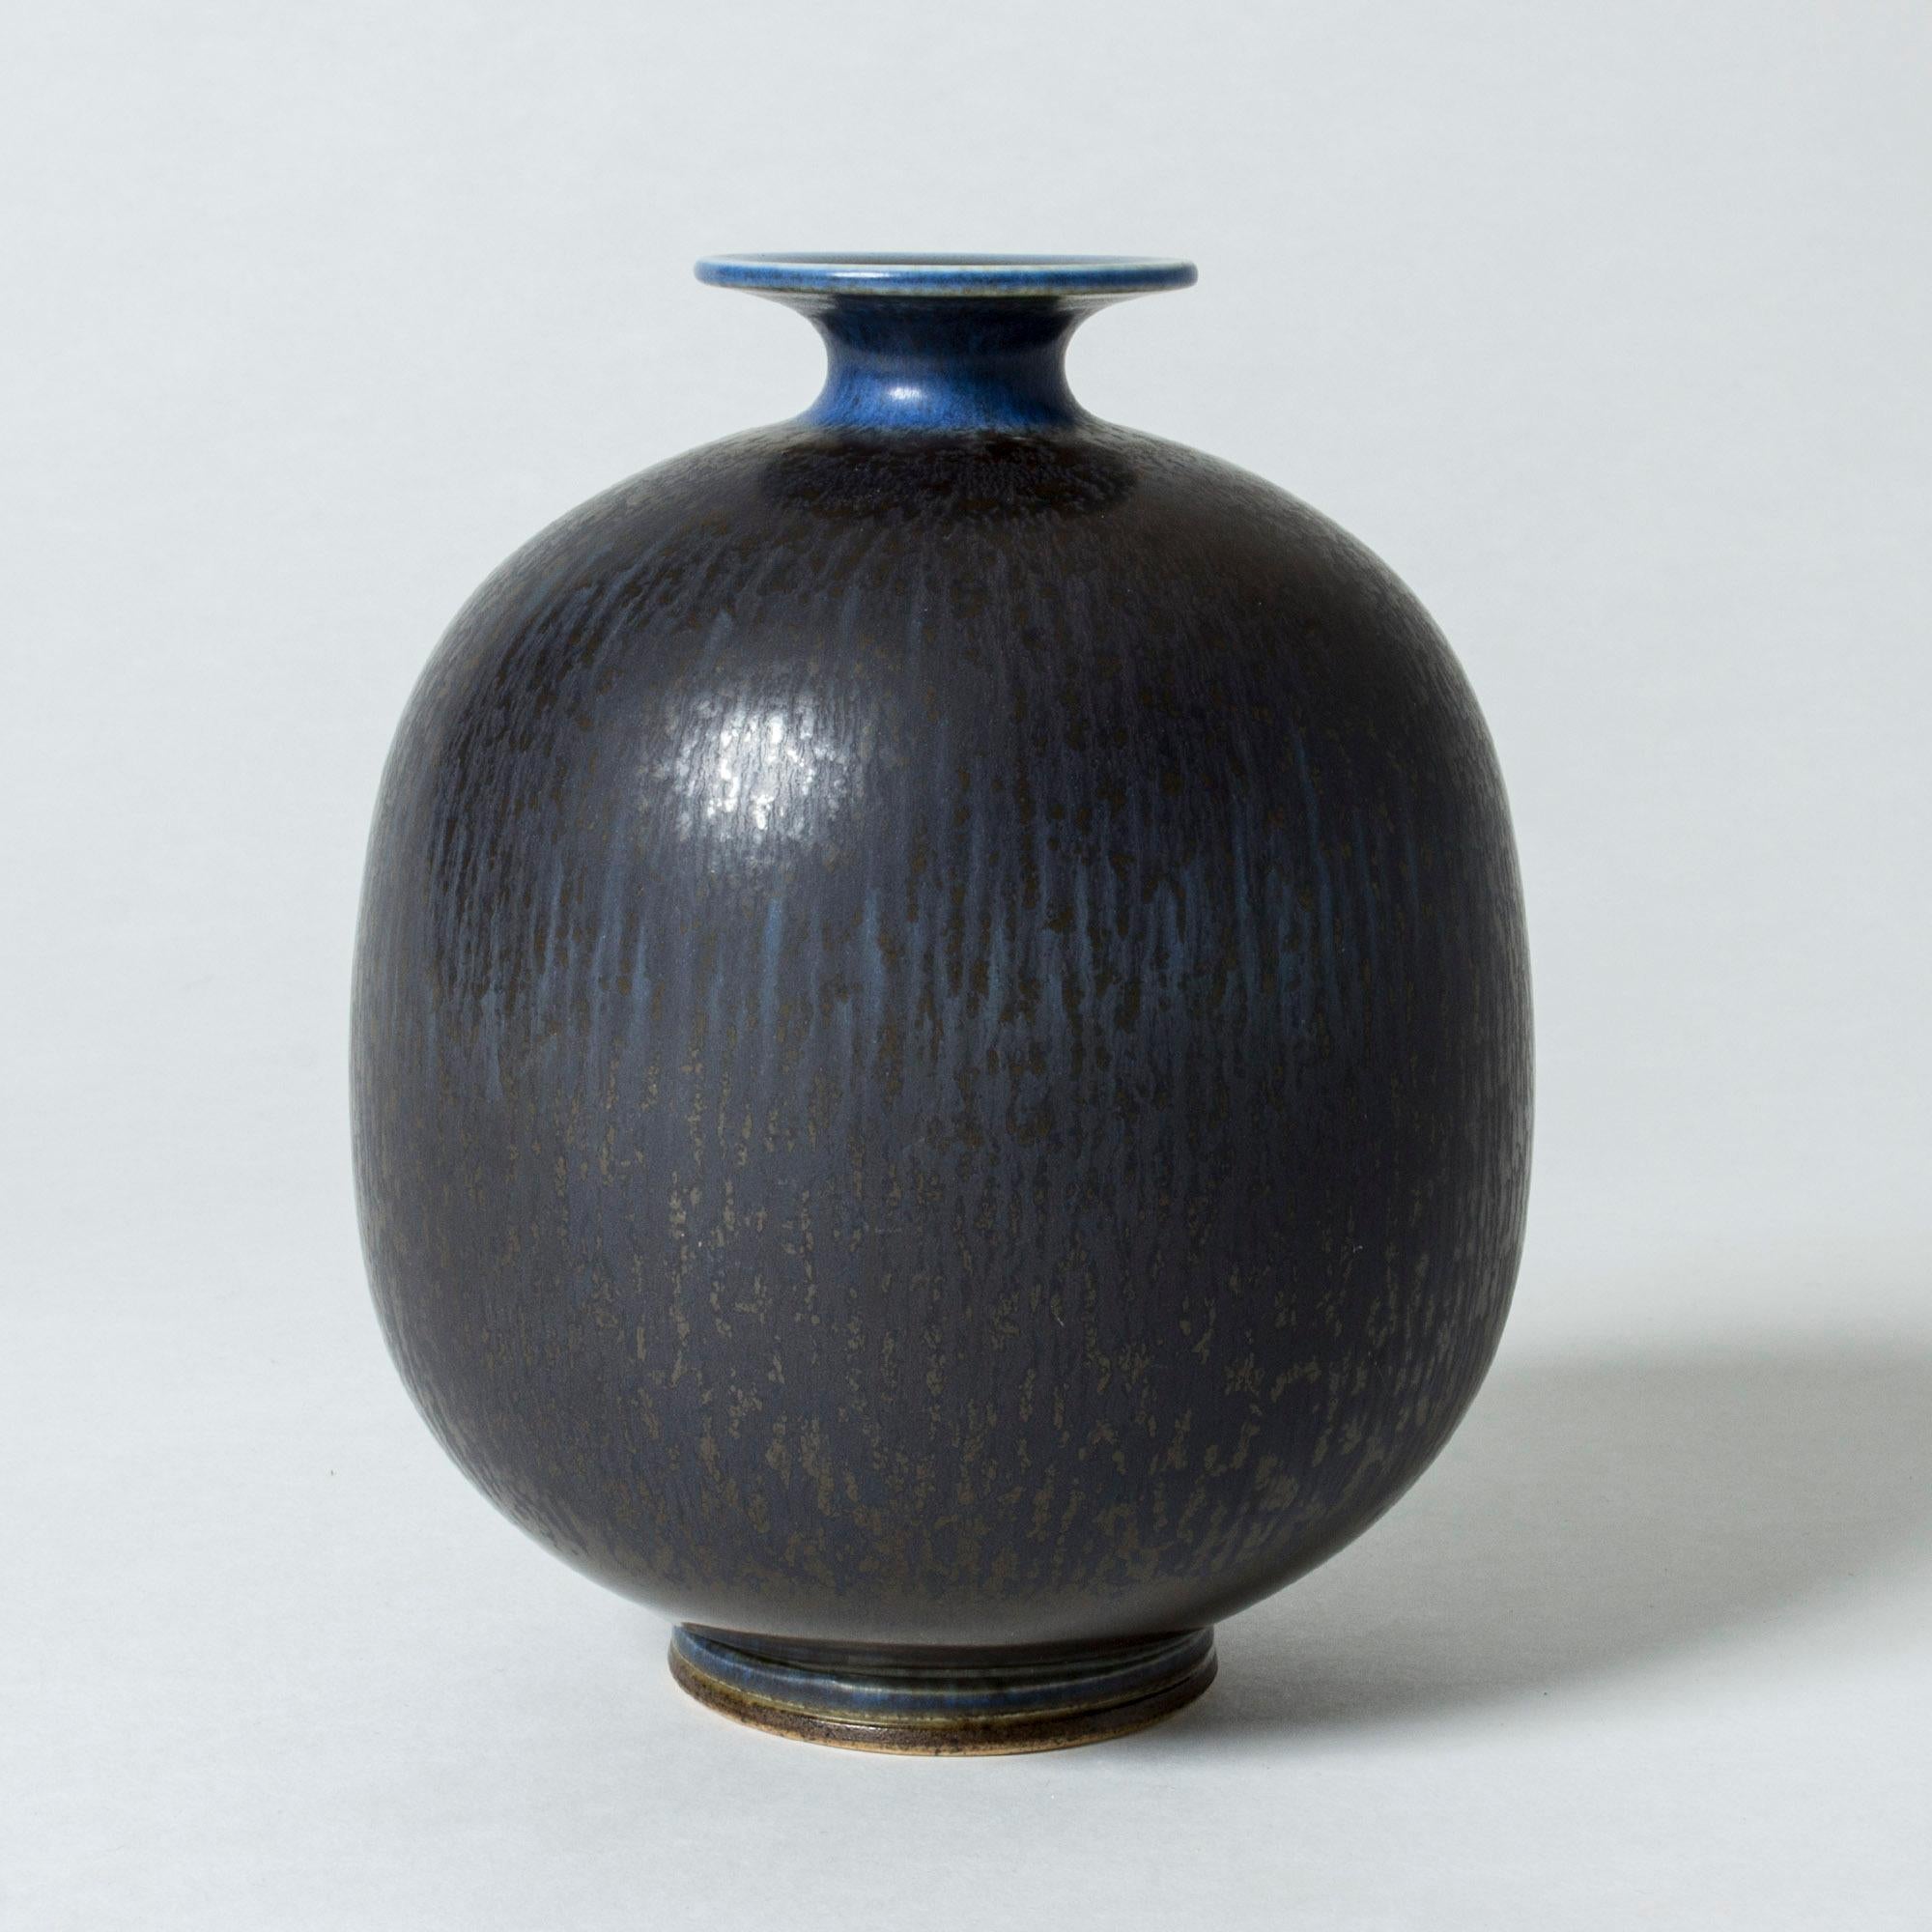 Beautiful stoneware vase by Berndt Friberg, in an plump streamlined shape. Dark blue hare’s fur glaze with a somewhat grainy expression.